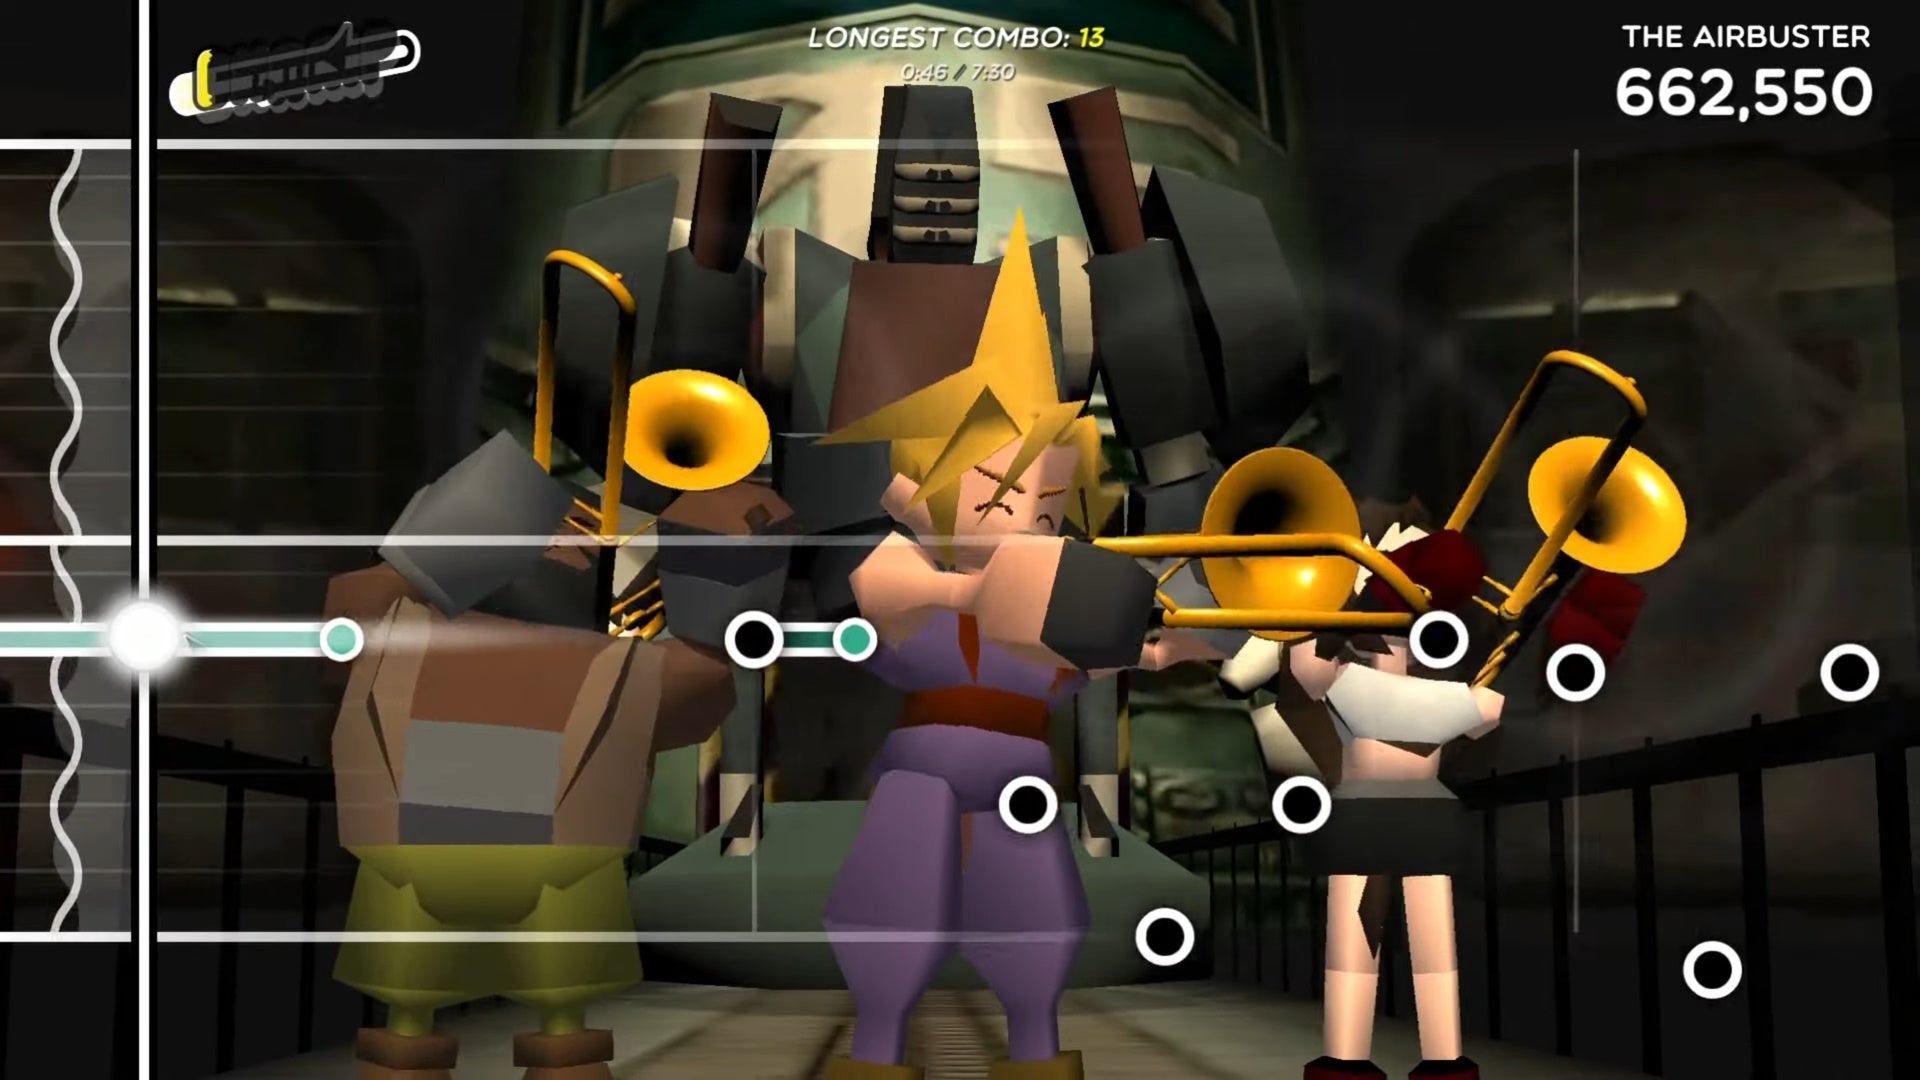 Cloud, Barret and Tifa play trombones in a mod for Trombone Champ